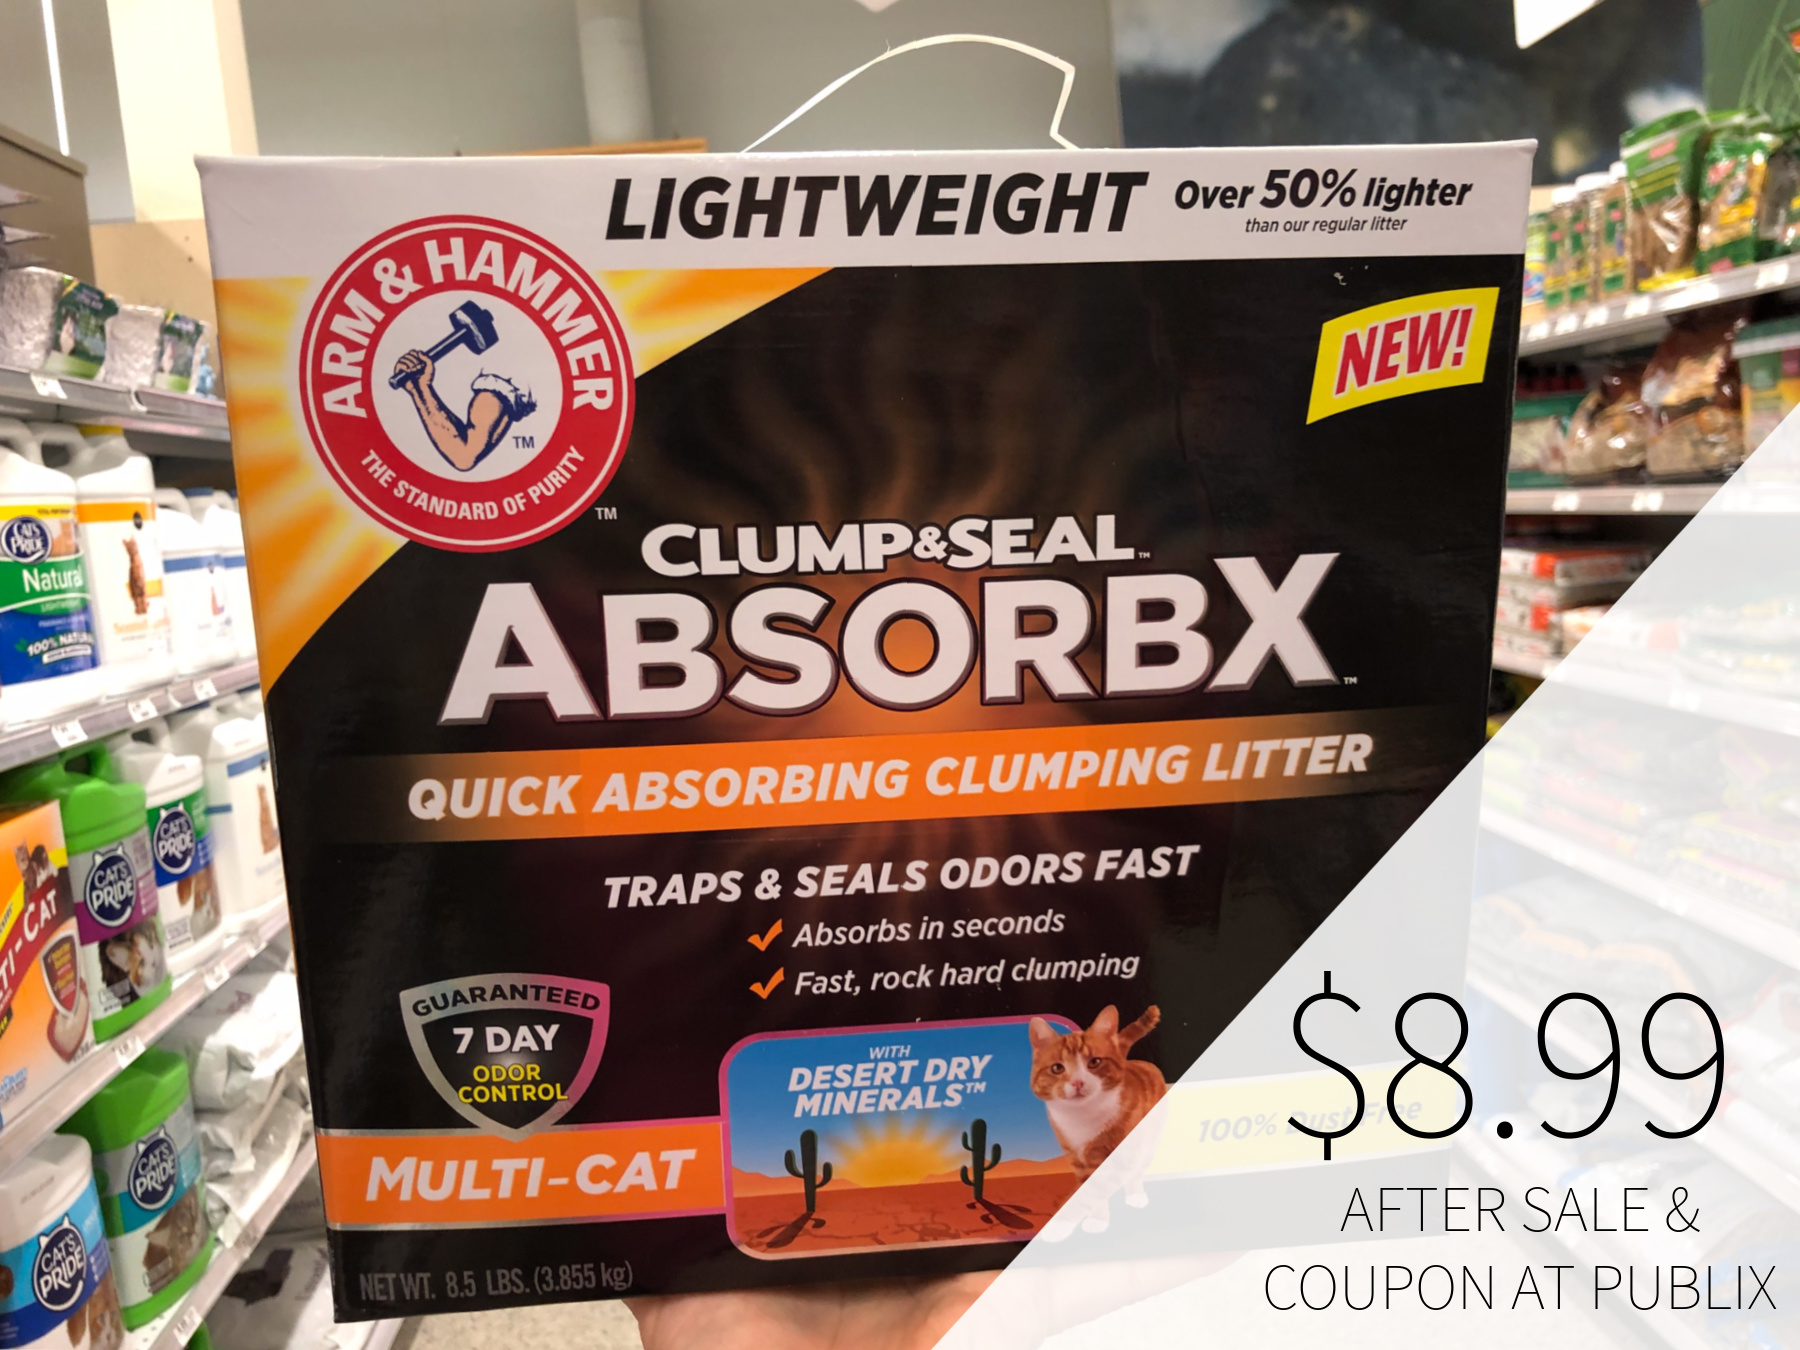 Try New ARM & HAMMER™ AbsorbX Clumping Litter - Save Now At Publix on I Heart Publix